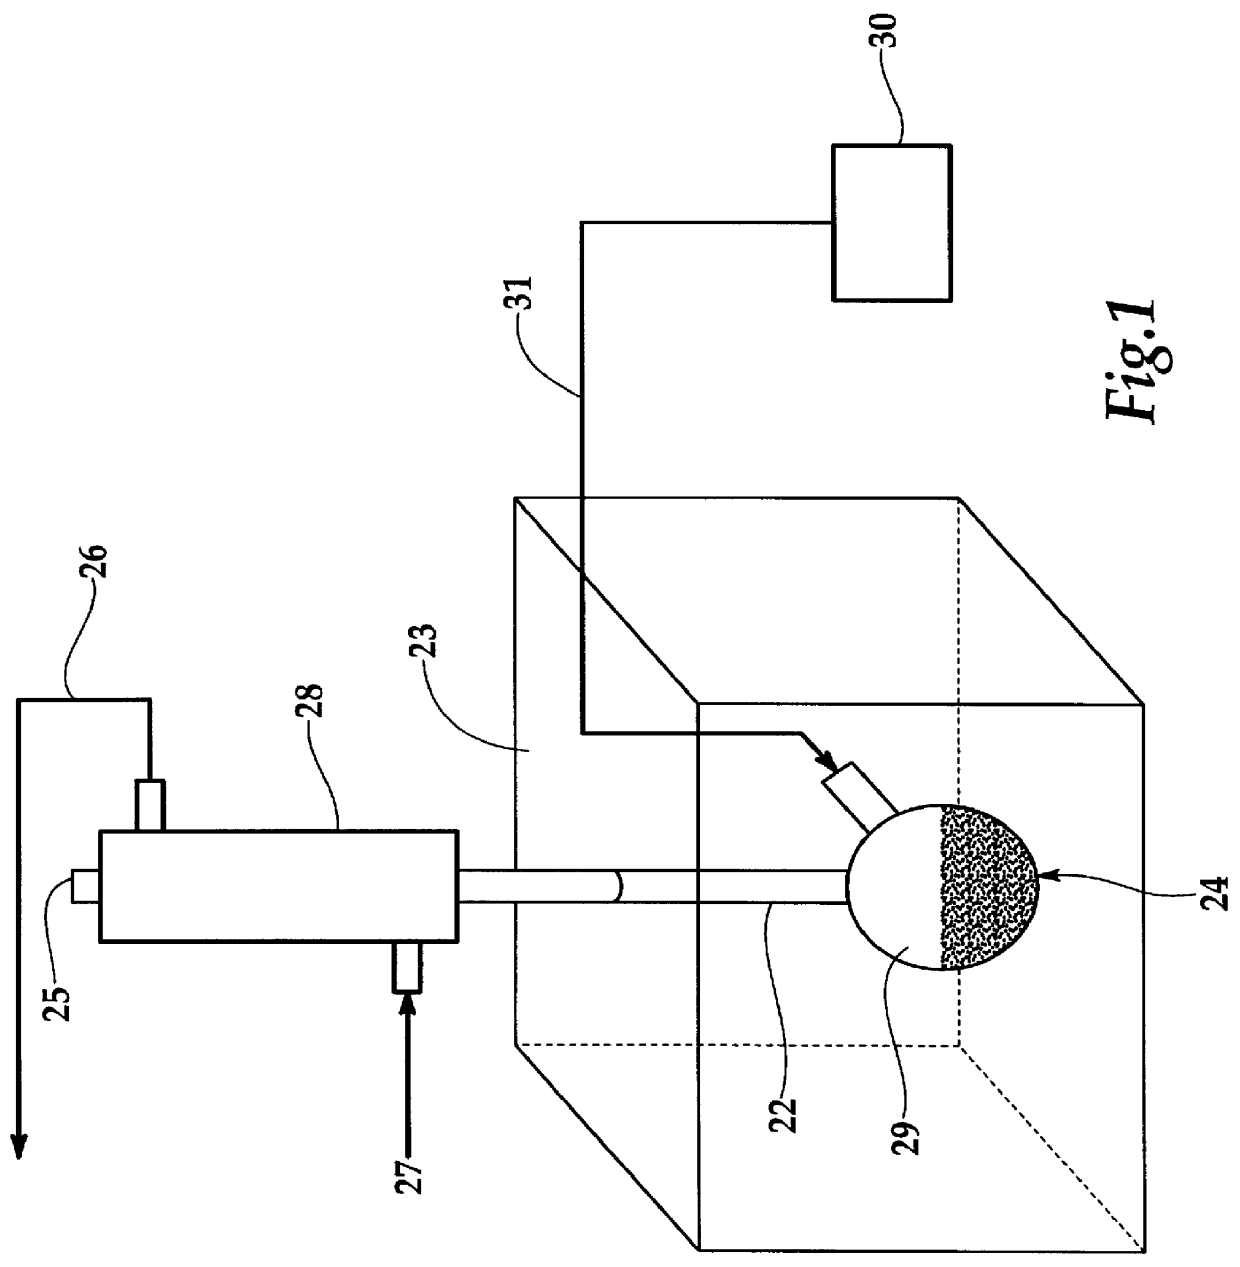 Process for microwave enhancement of gaseous decomposition reactions in solutions